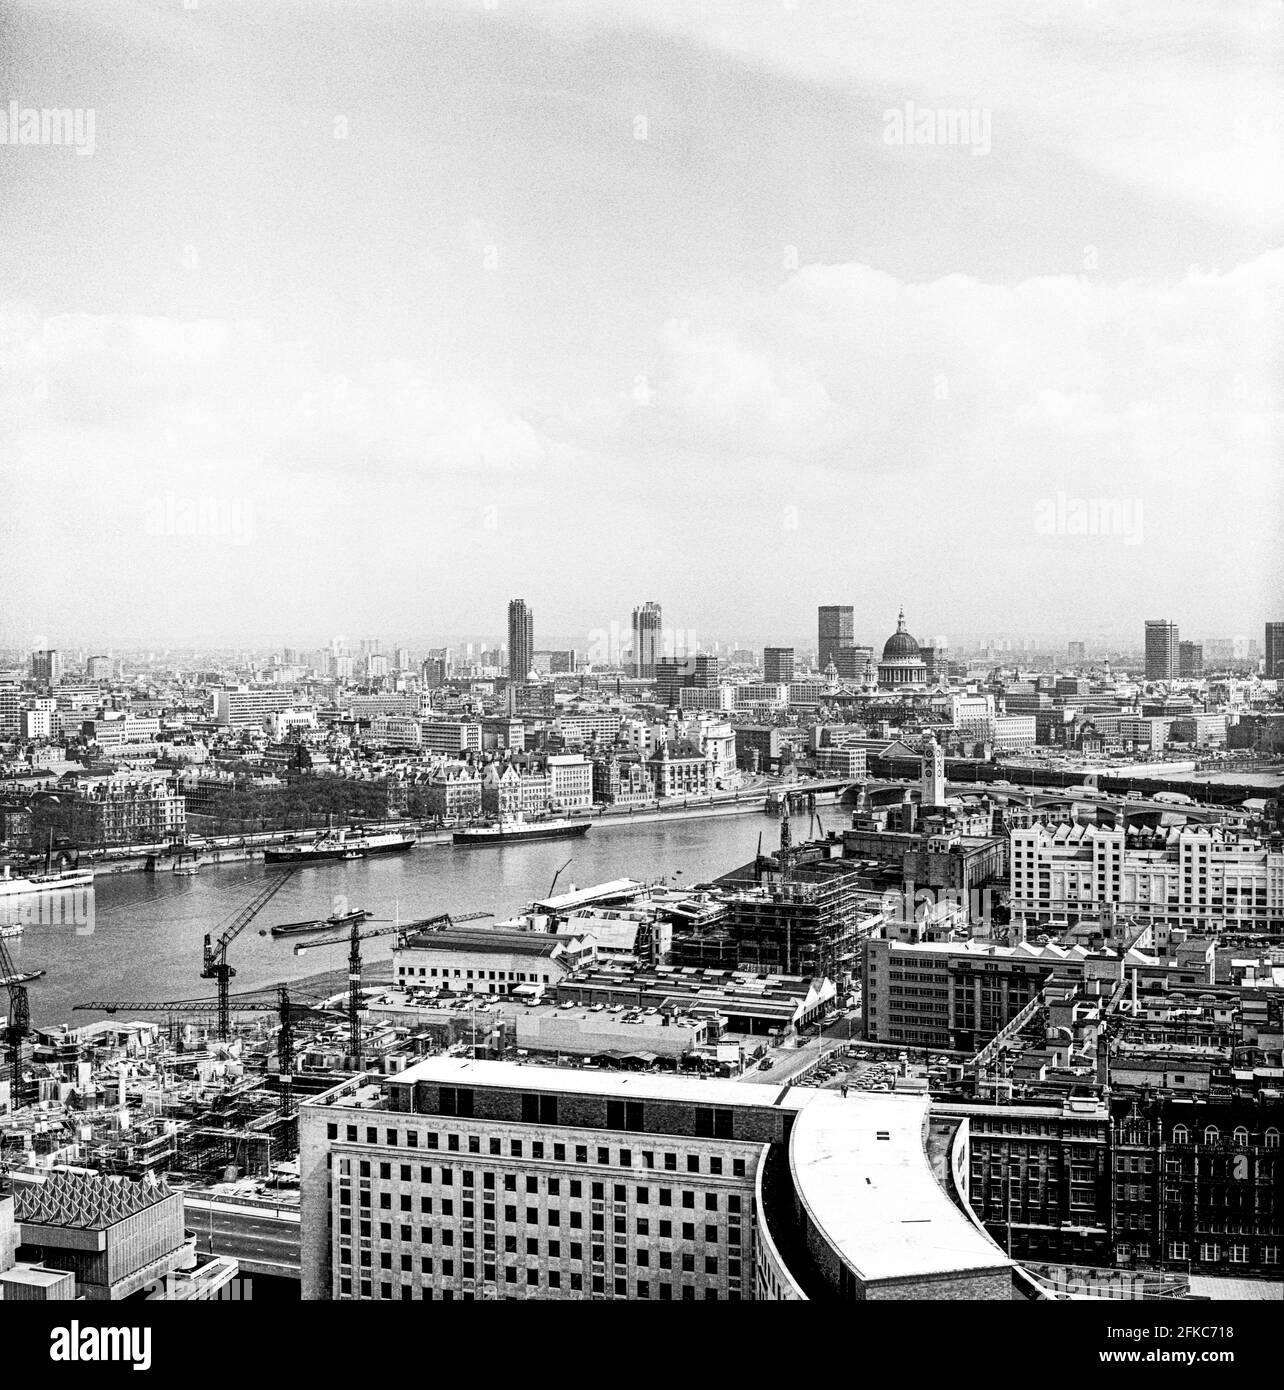 View of the City of London skyline from the Shell Centre, London UK - Taken in 1971 Stock Photo